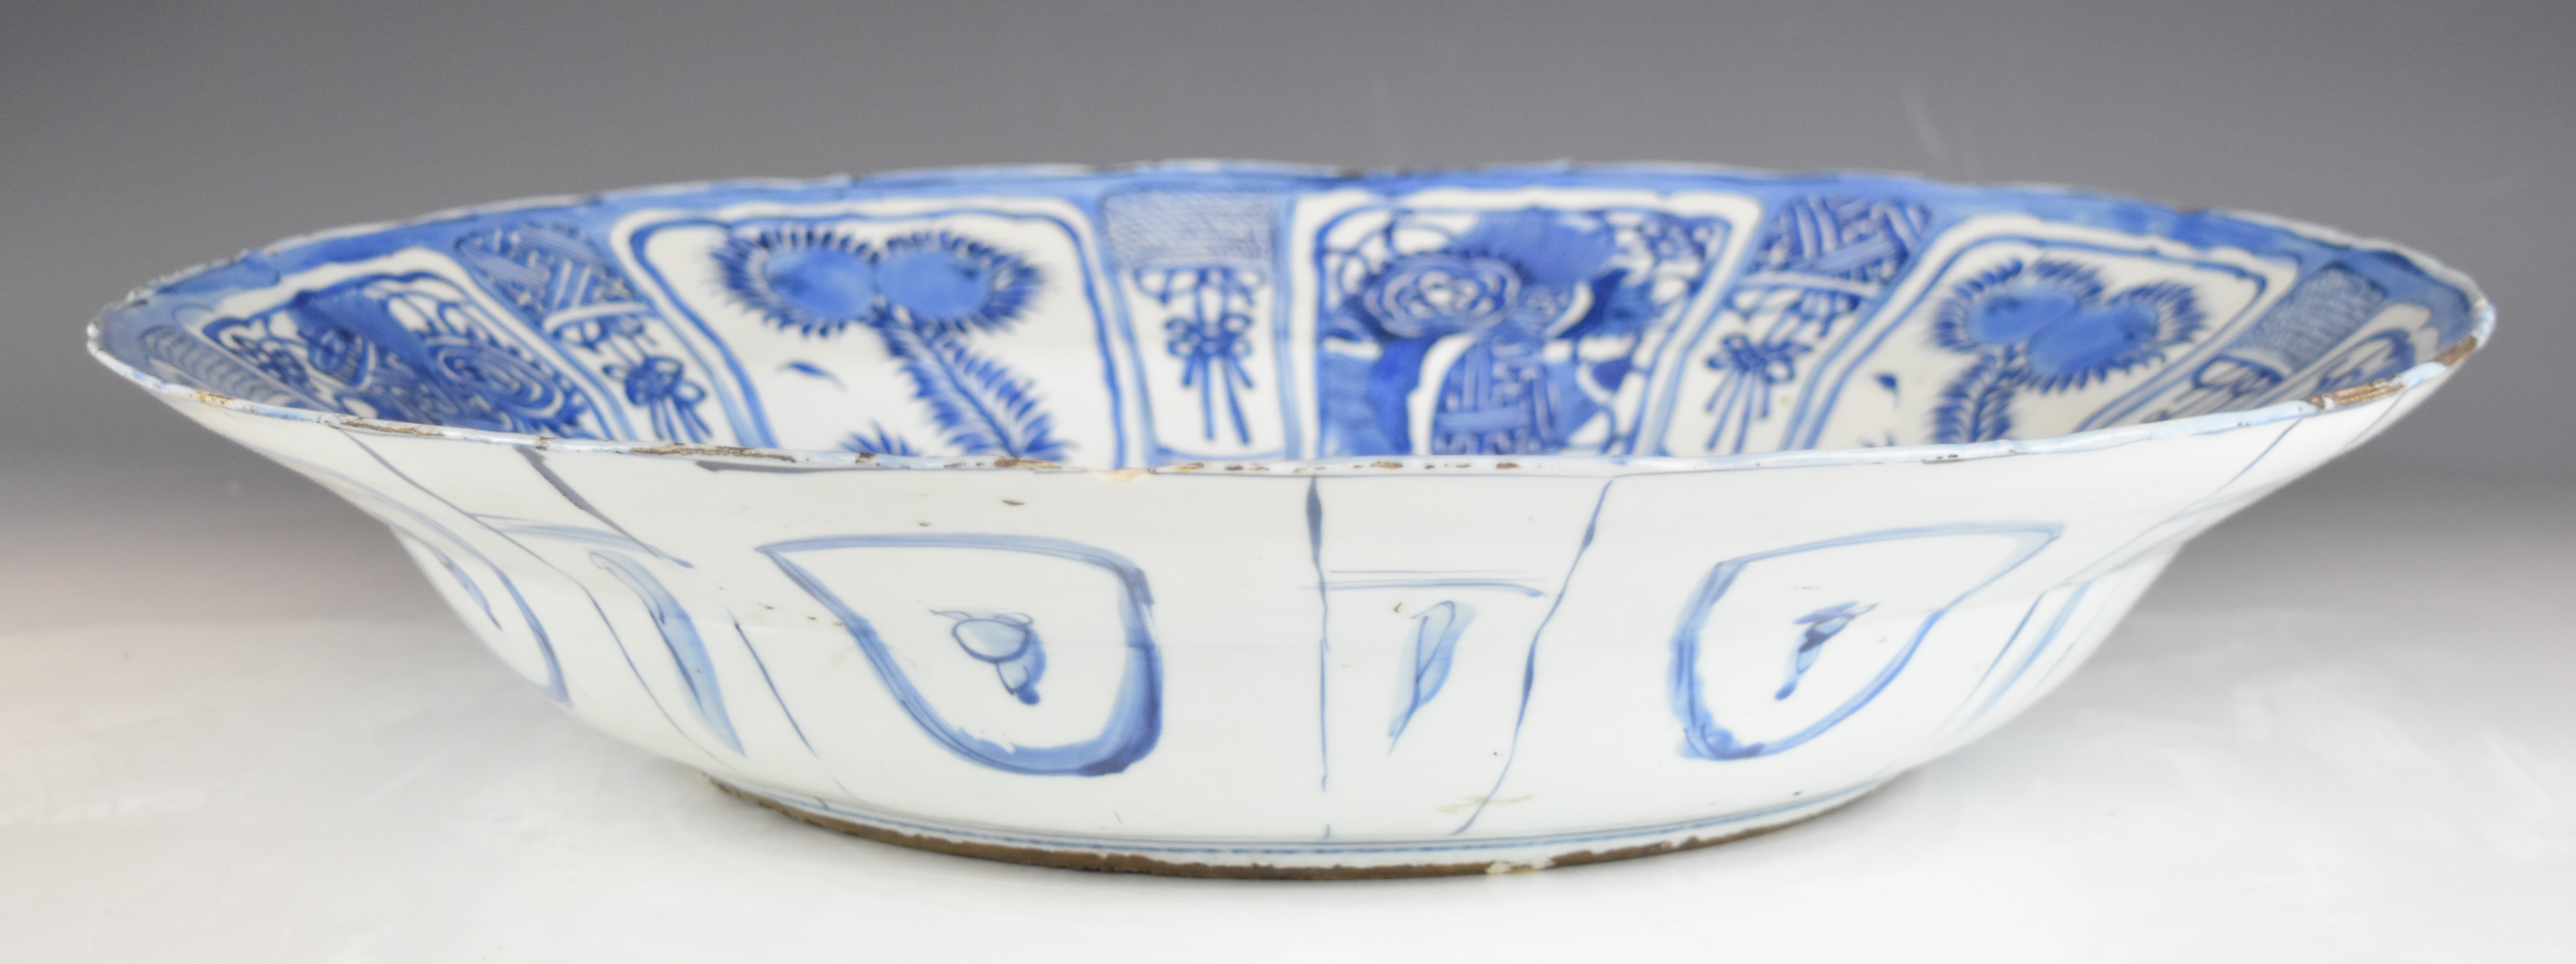 Chinese Kraak porcelain large charger or bowl with central decoration of flora and fauna, diameter - Image 7 of 10